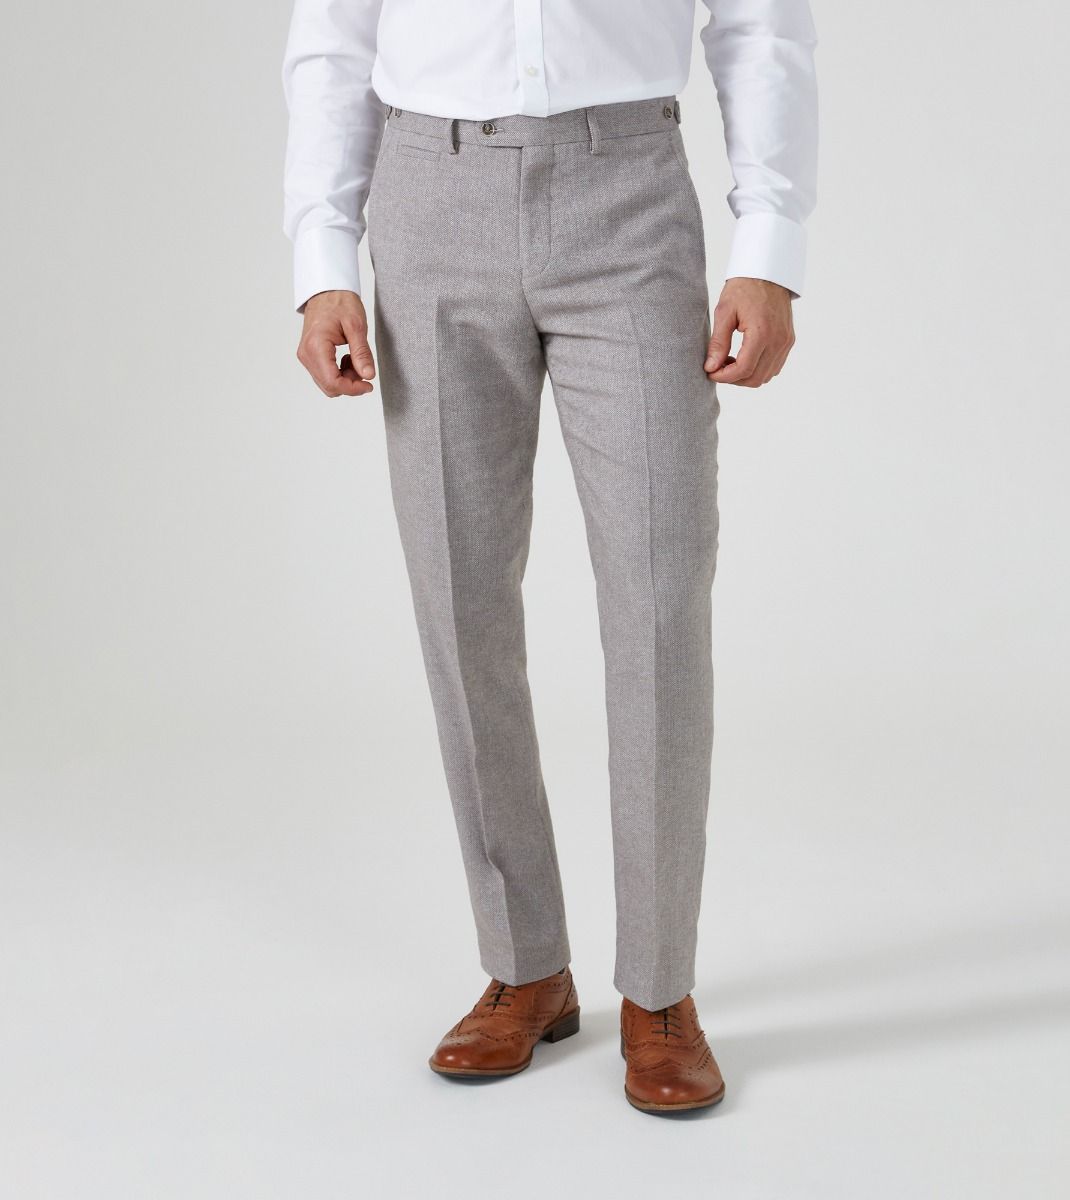 Jude Tweed Suit Trousers - Stone